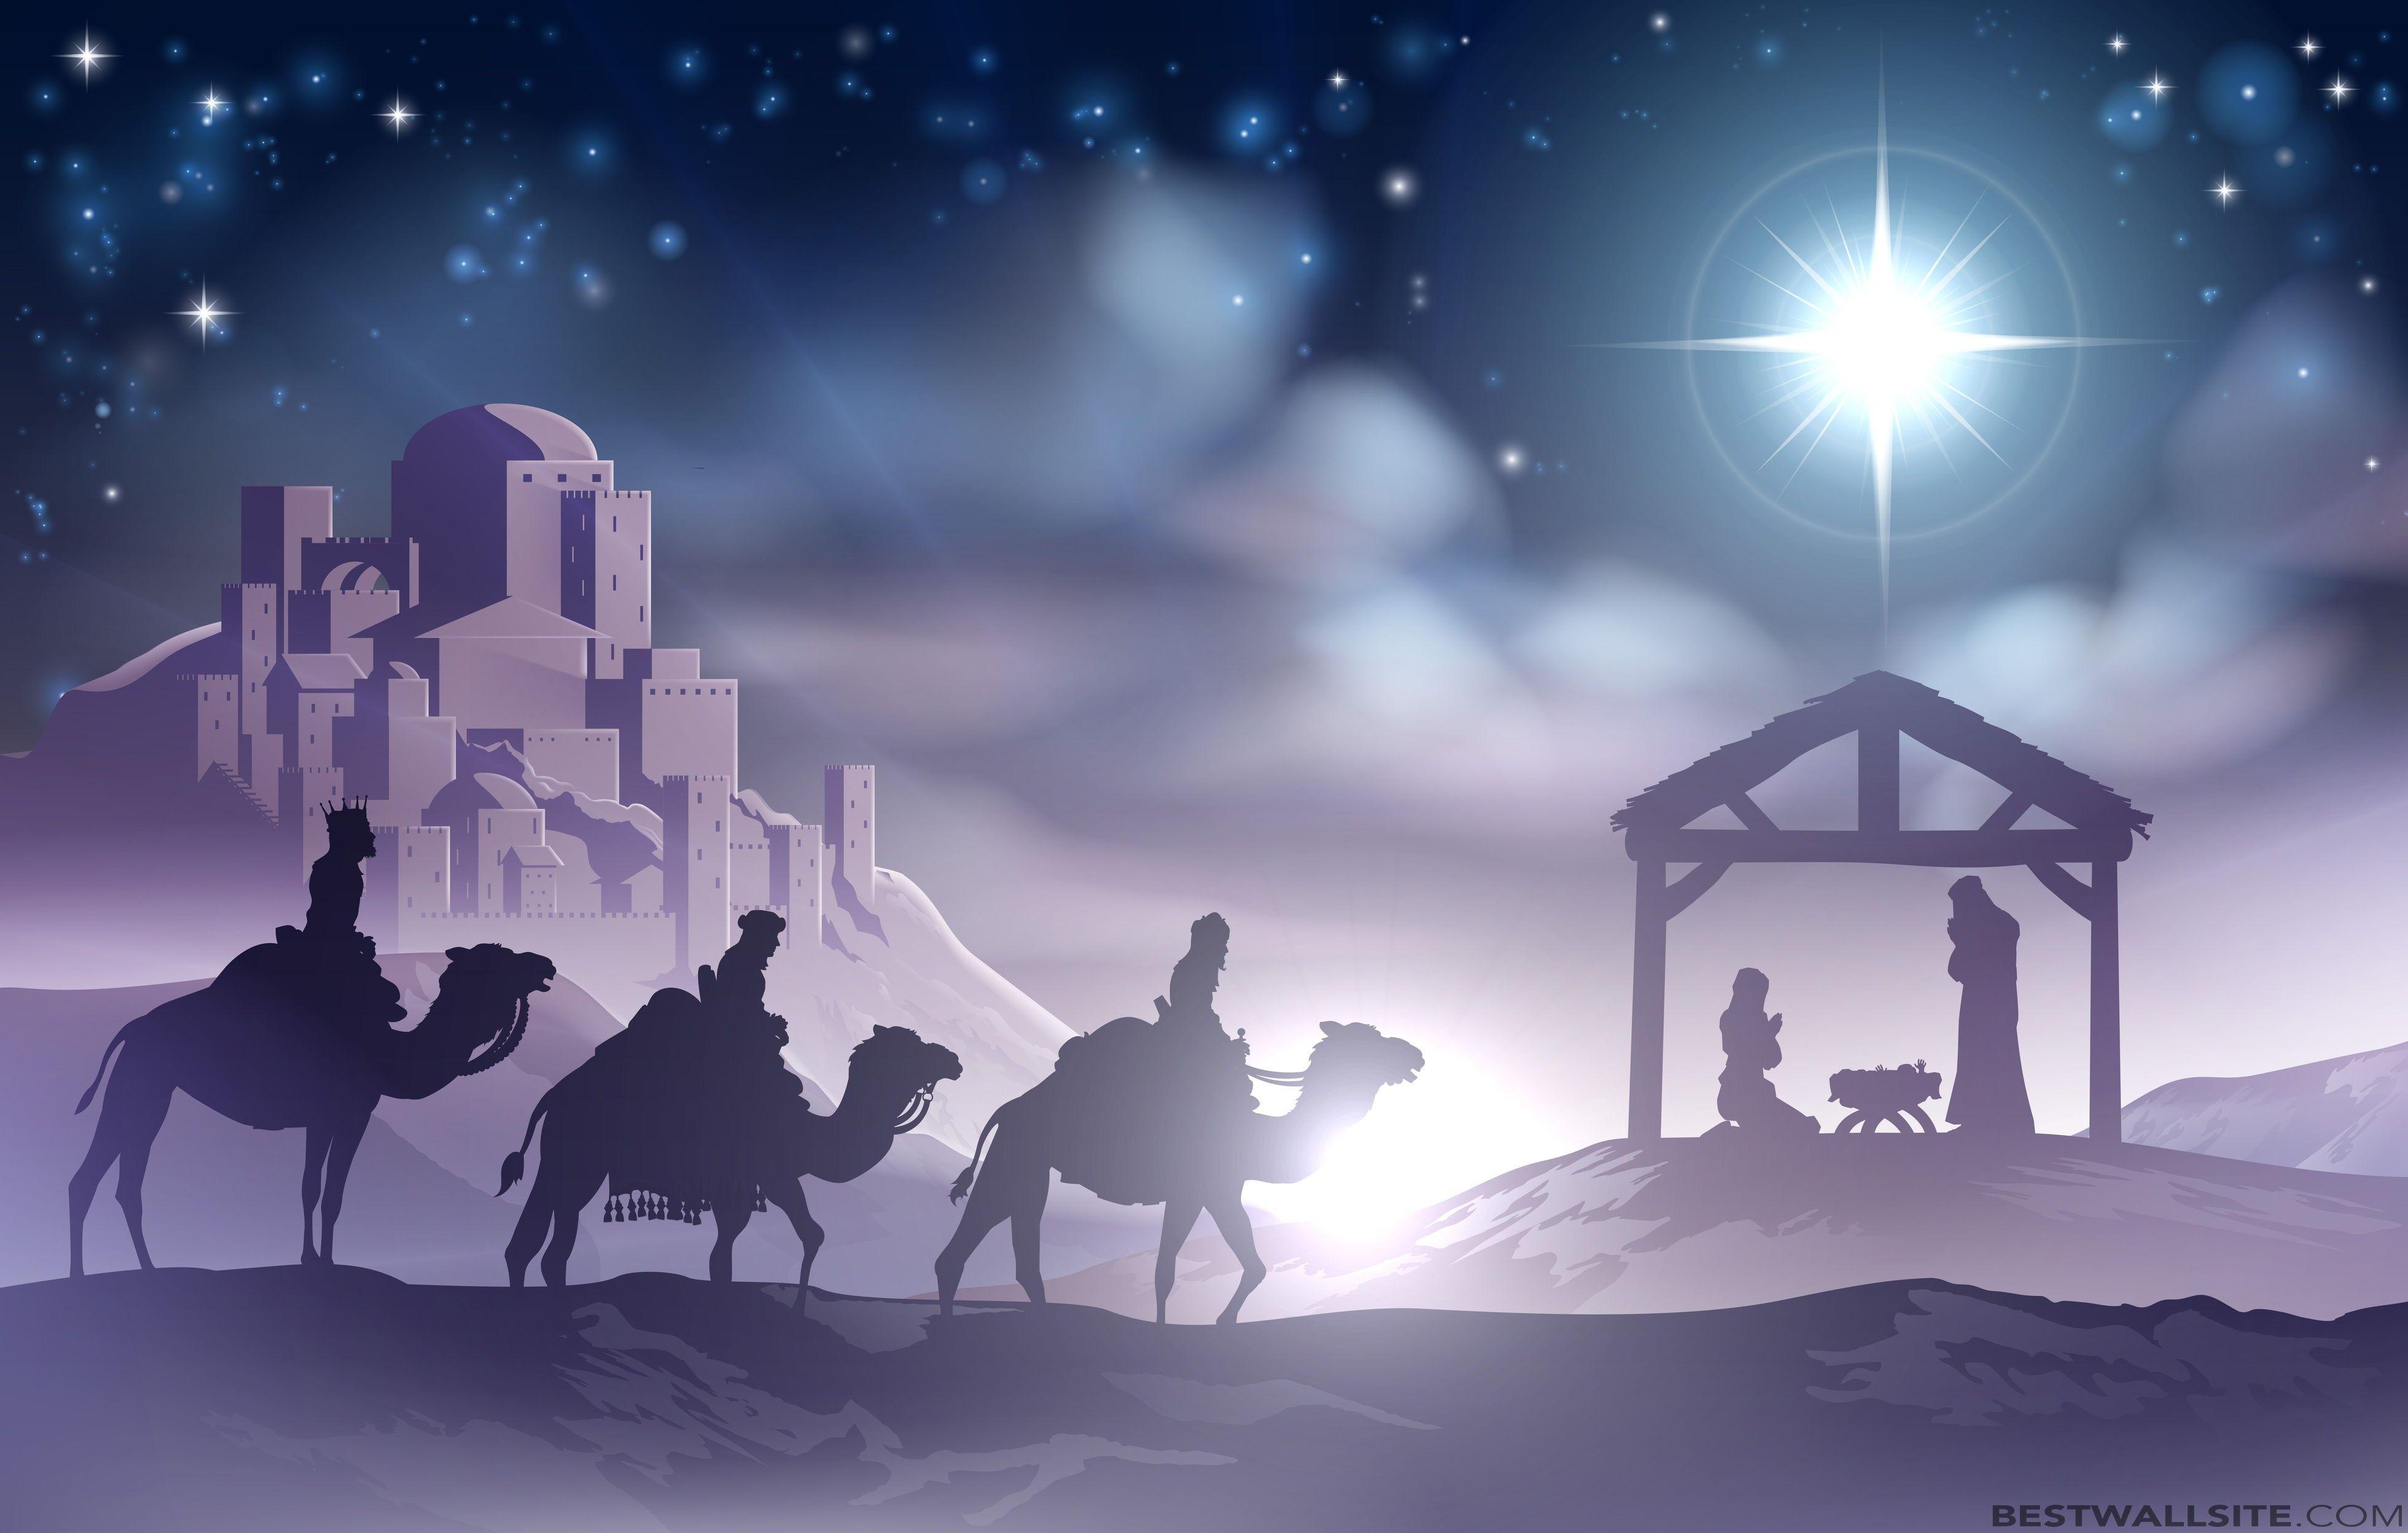 Christmas Nativity Wallpapers Top Free Christmas Nativity Backgrounds Wallpaperaccess